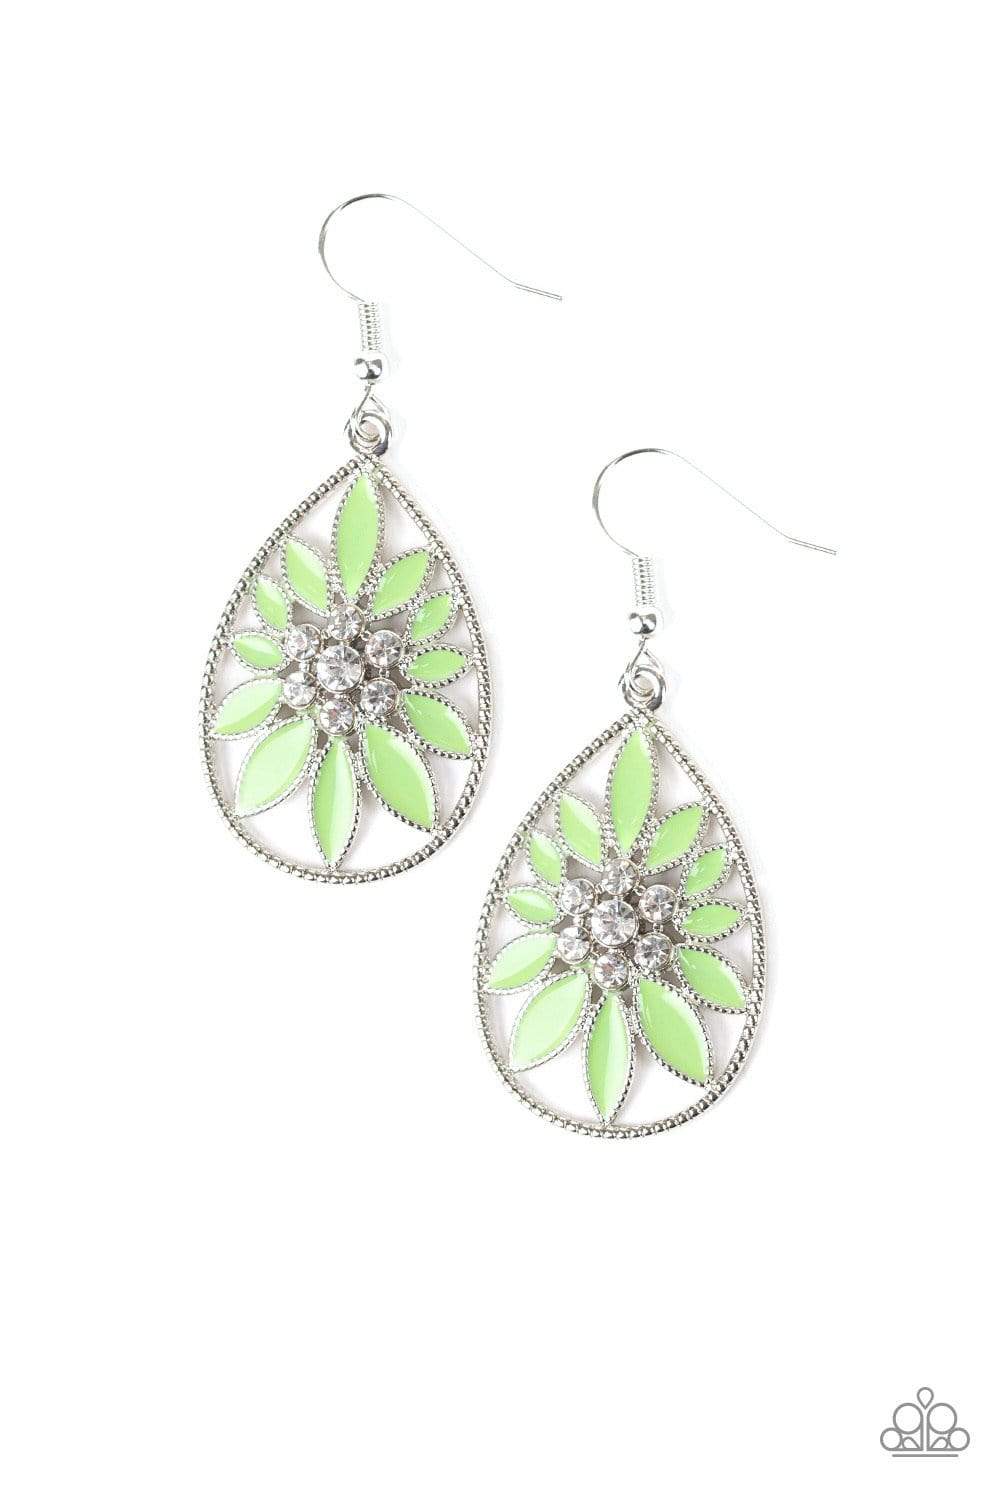 Floral Morals - Green Earrings